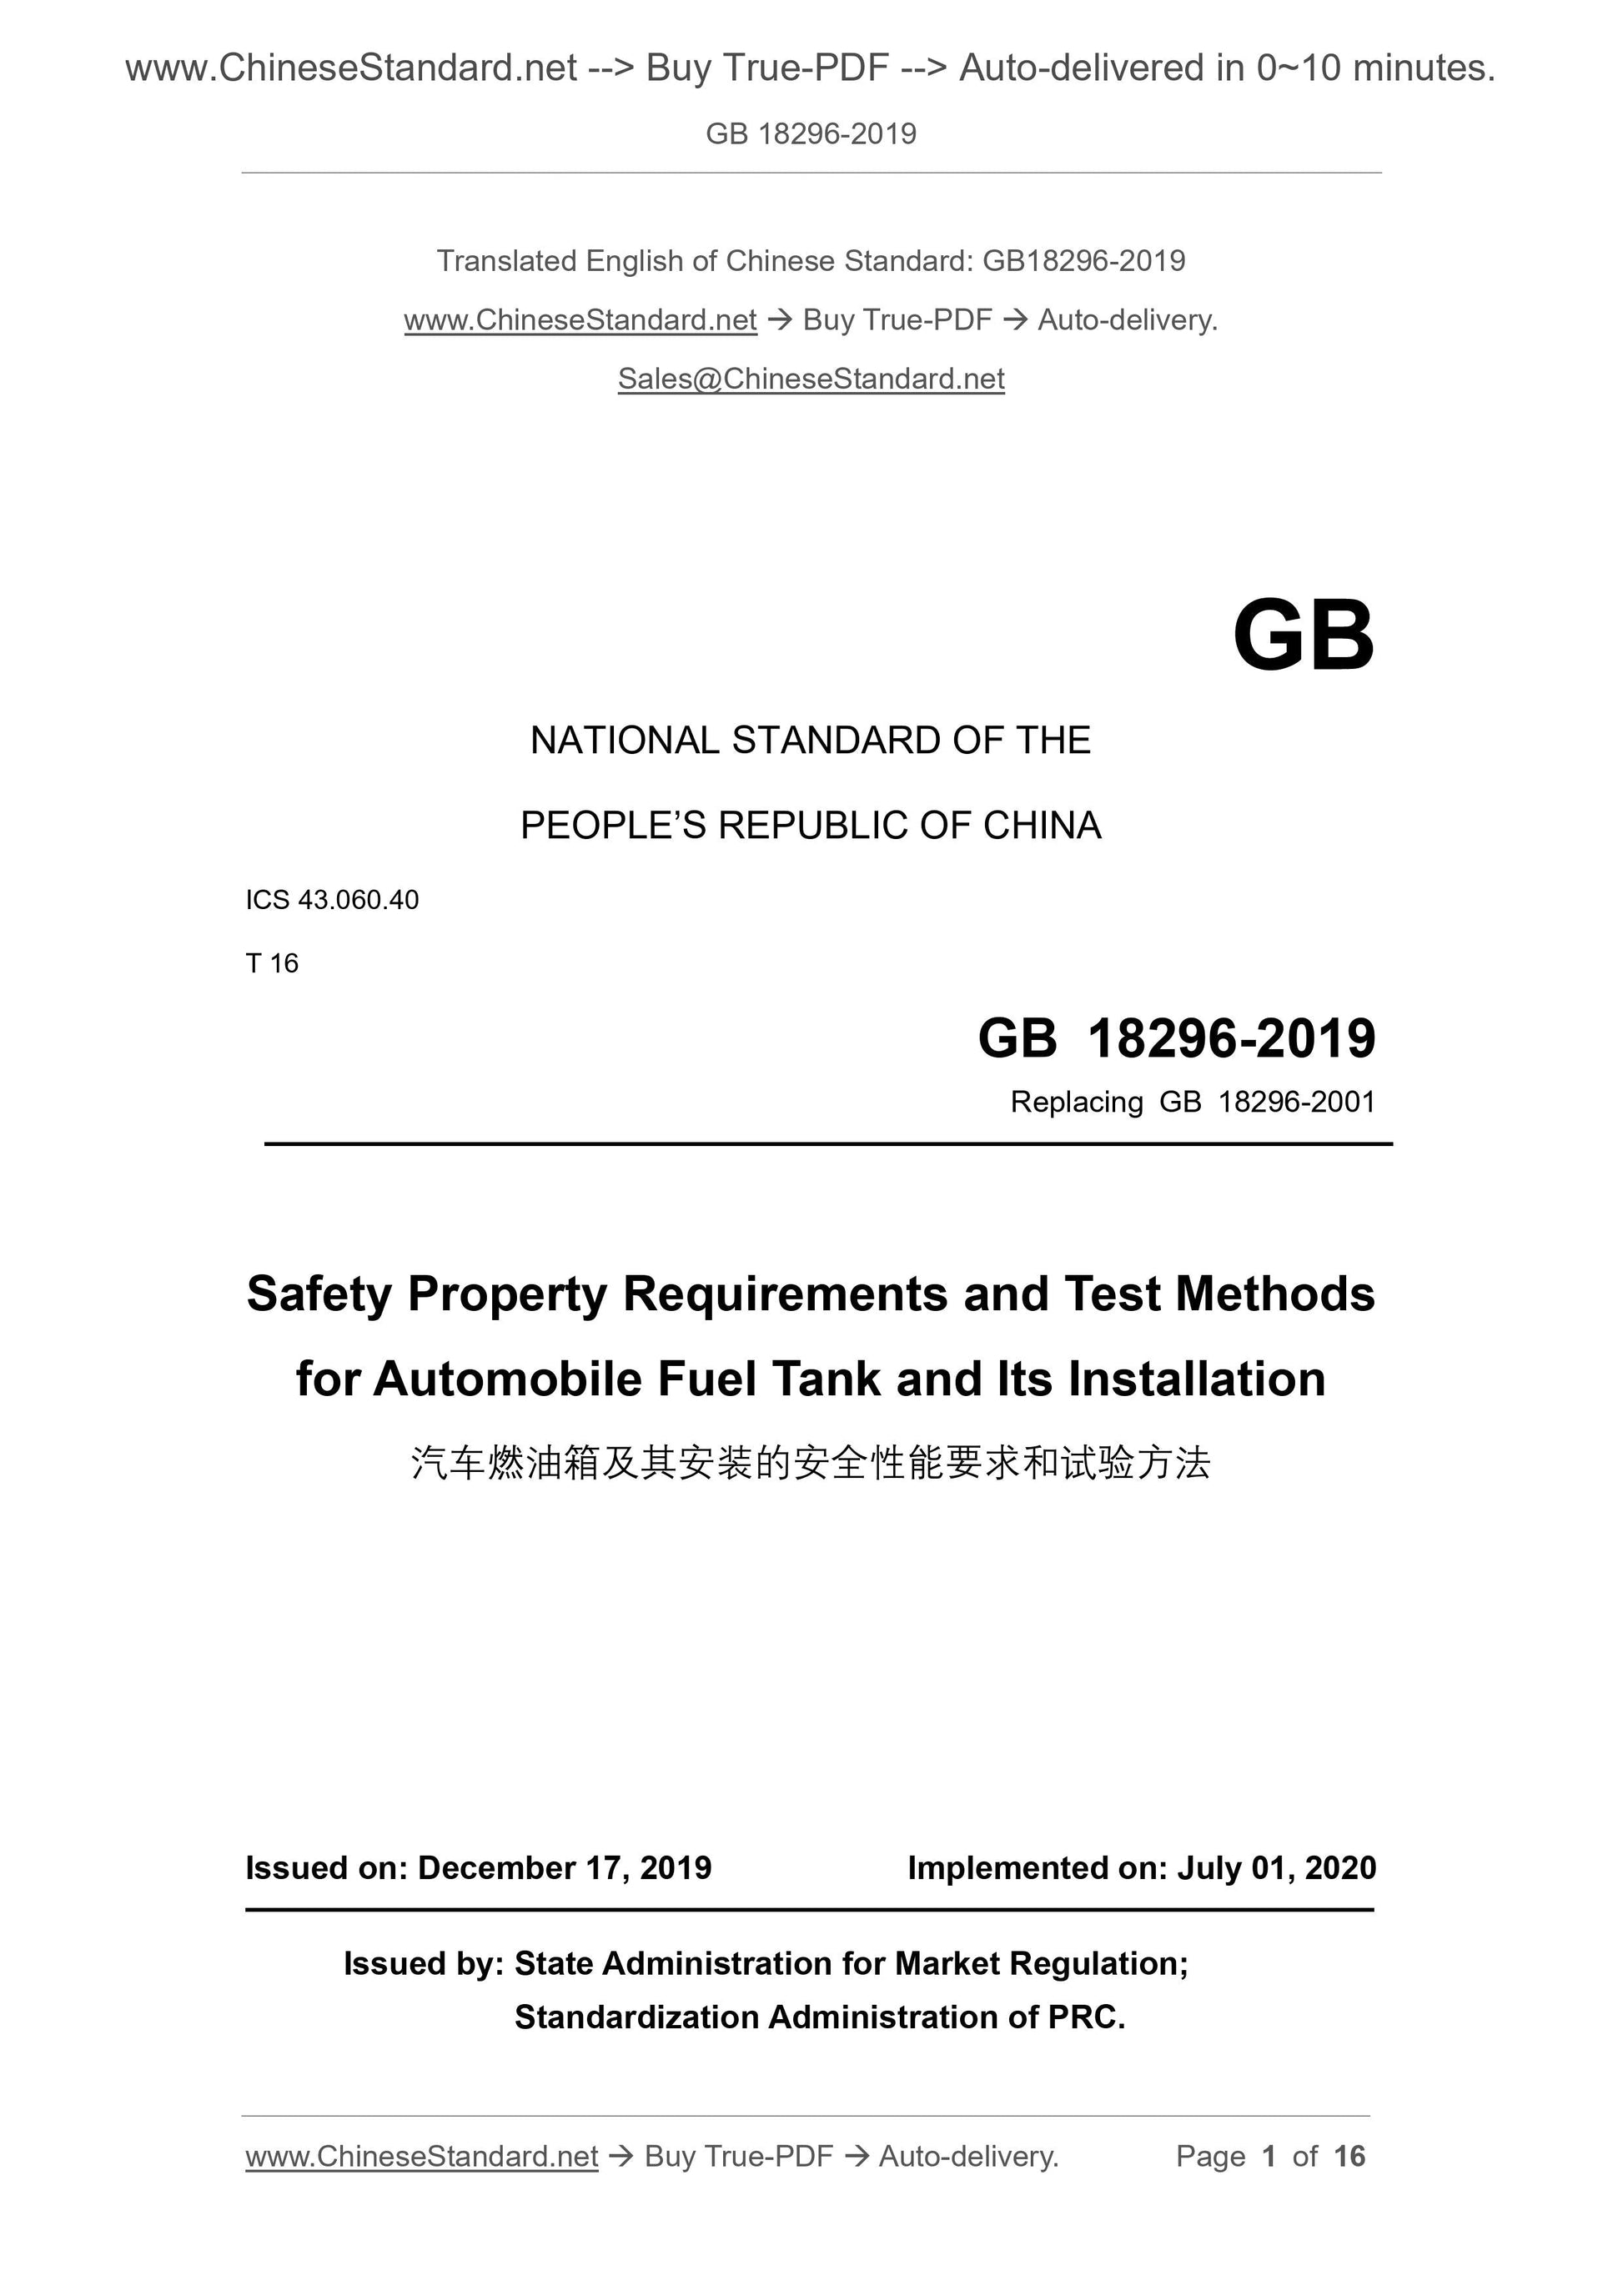 GB 18296-2019 Page 1